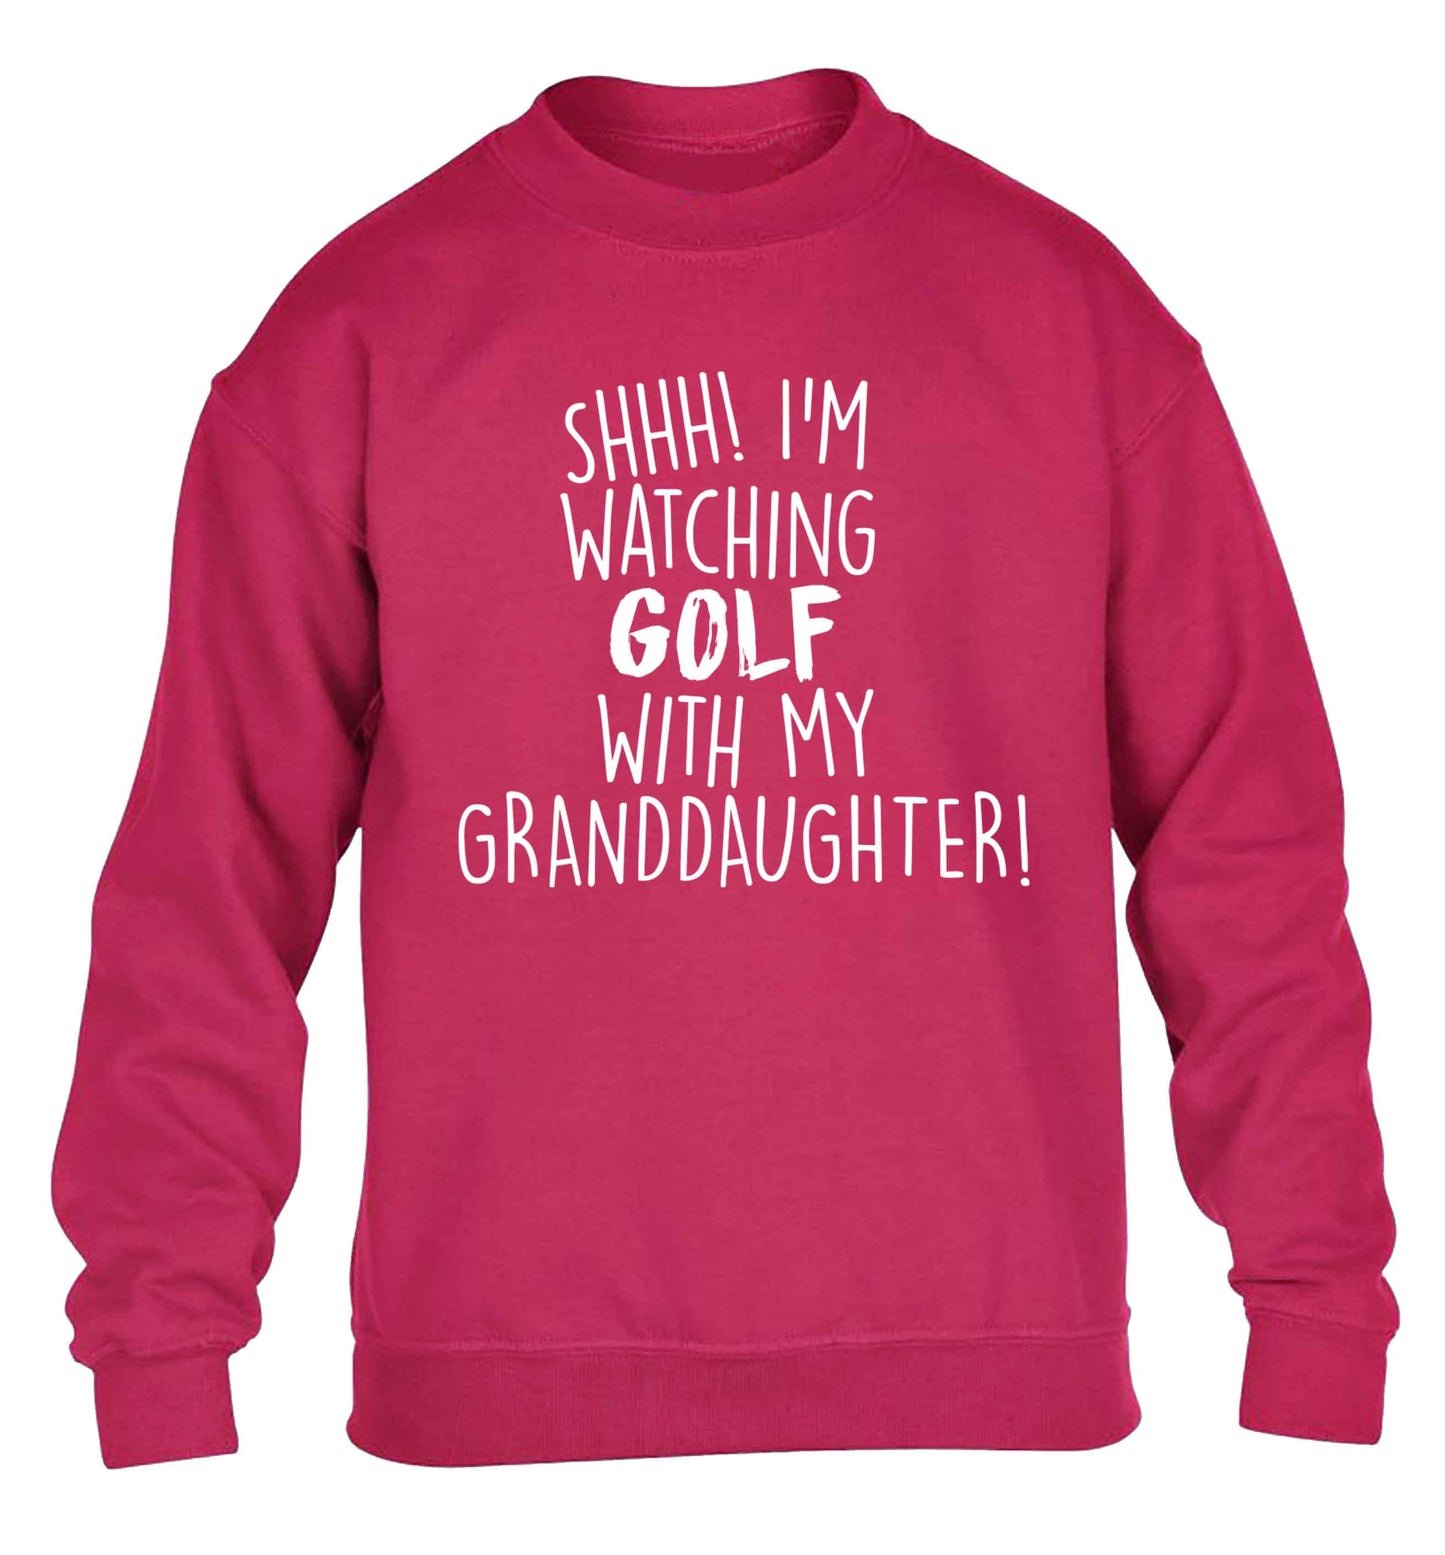 Shh I'm watching golf with my granddaughter children's pink sweater 12-13 Years